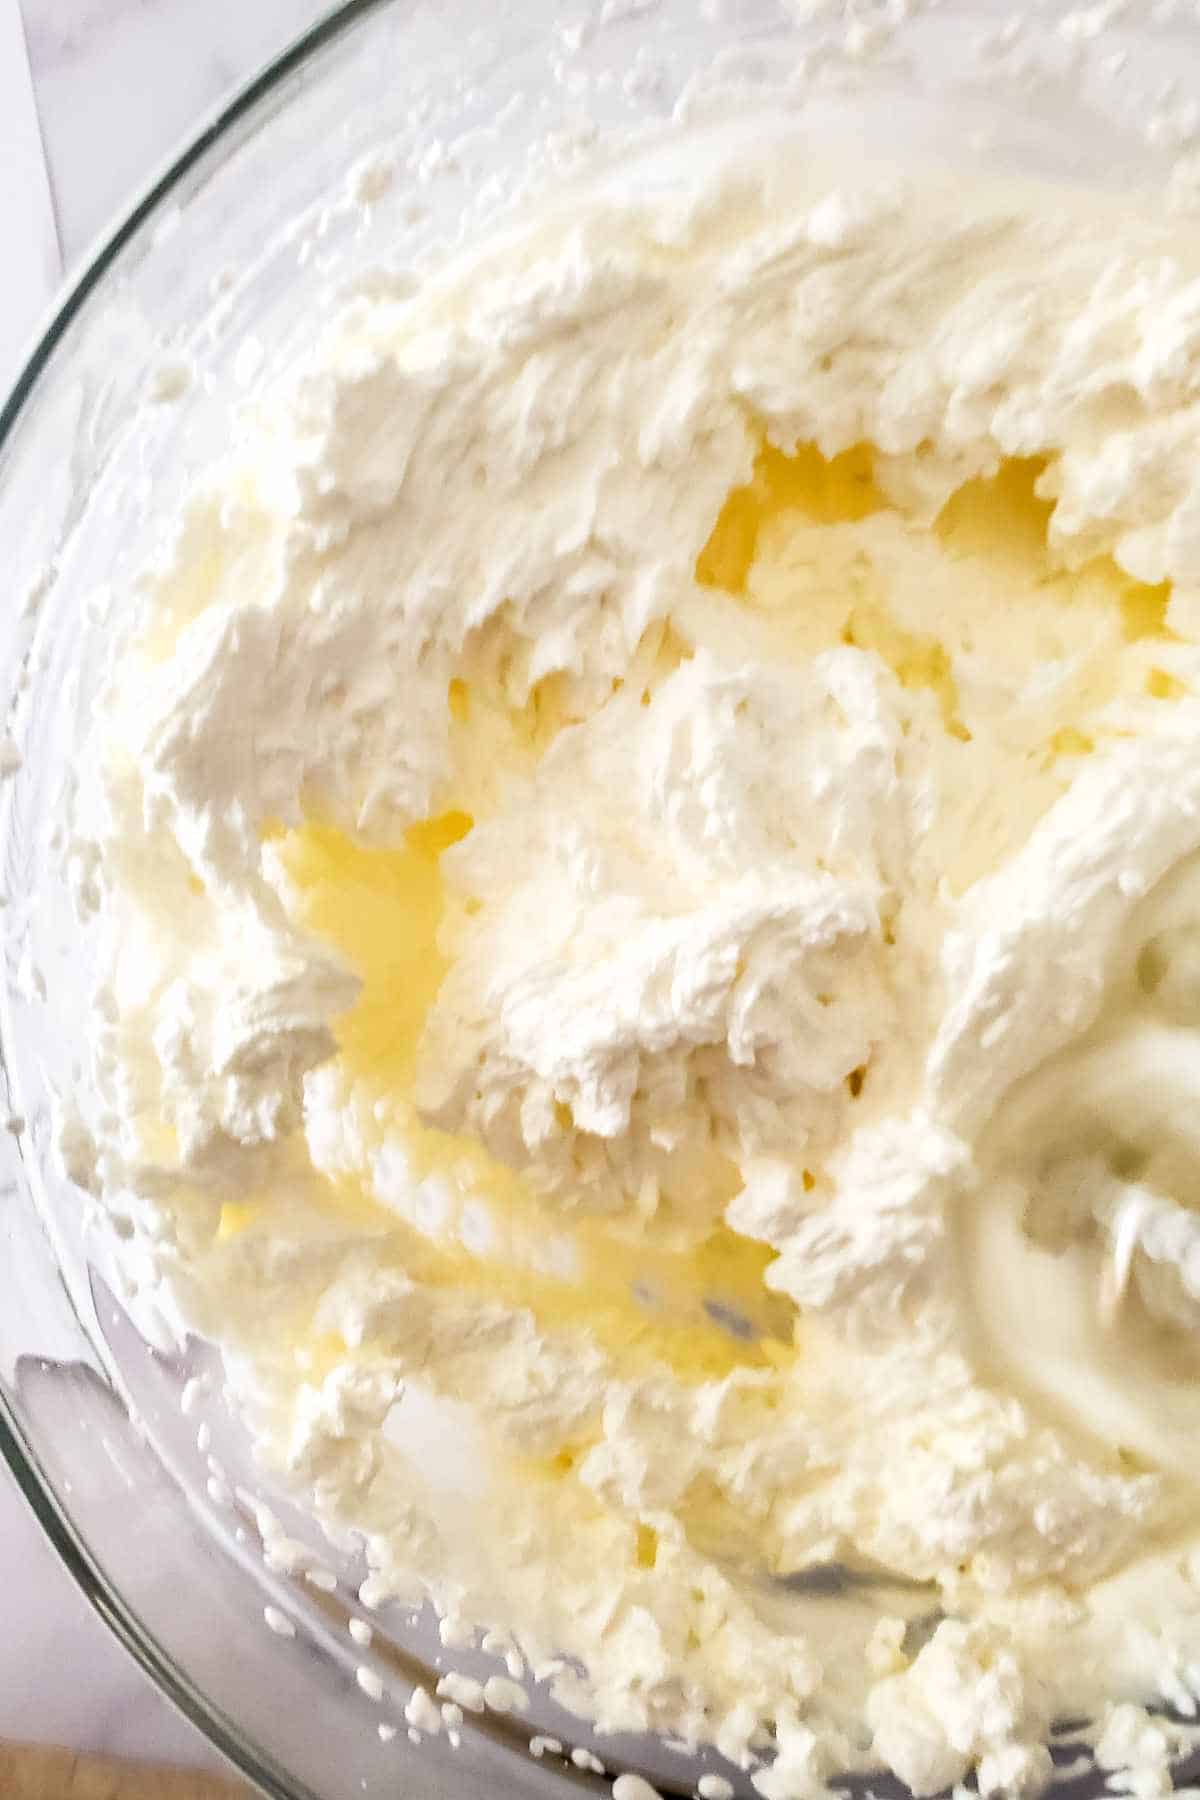 whipping cream to high, stiff peaks until it breaks down.